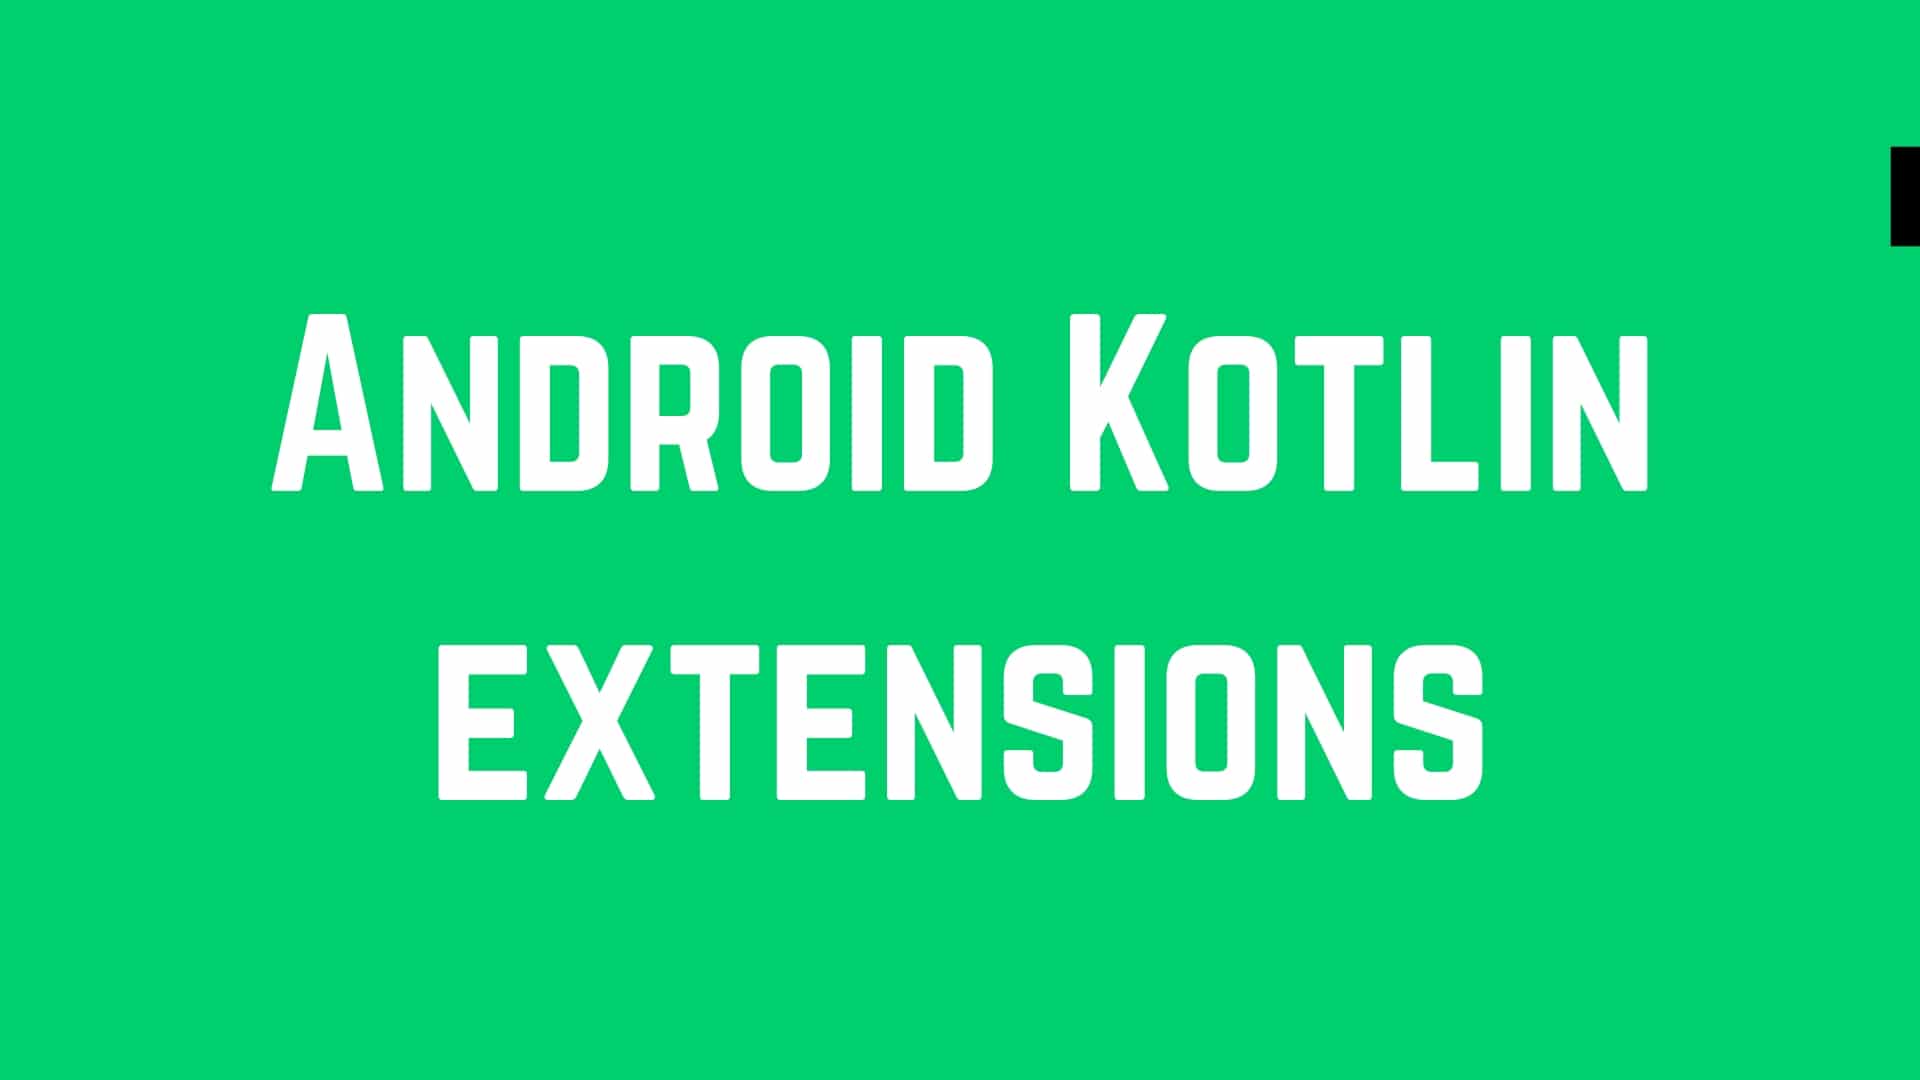 Why Kotlin extension is preferable to use in android project